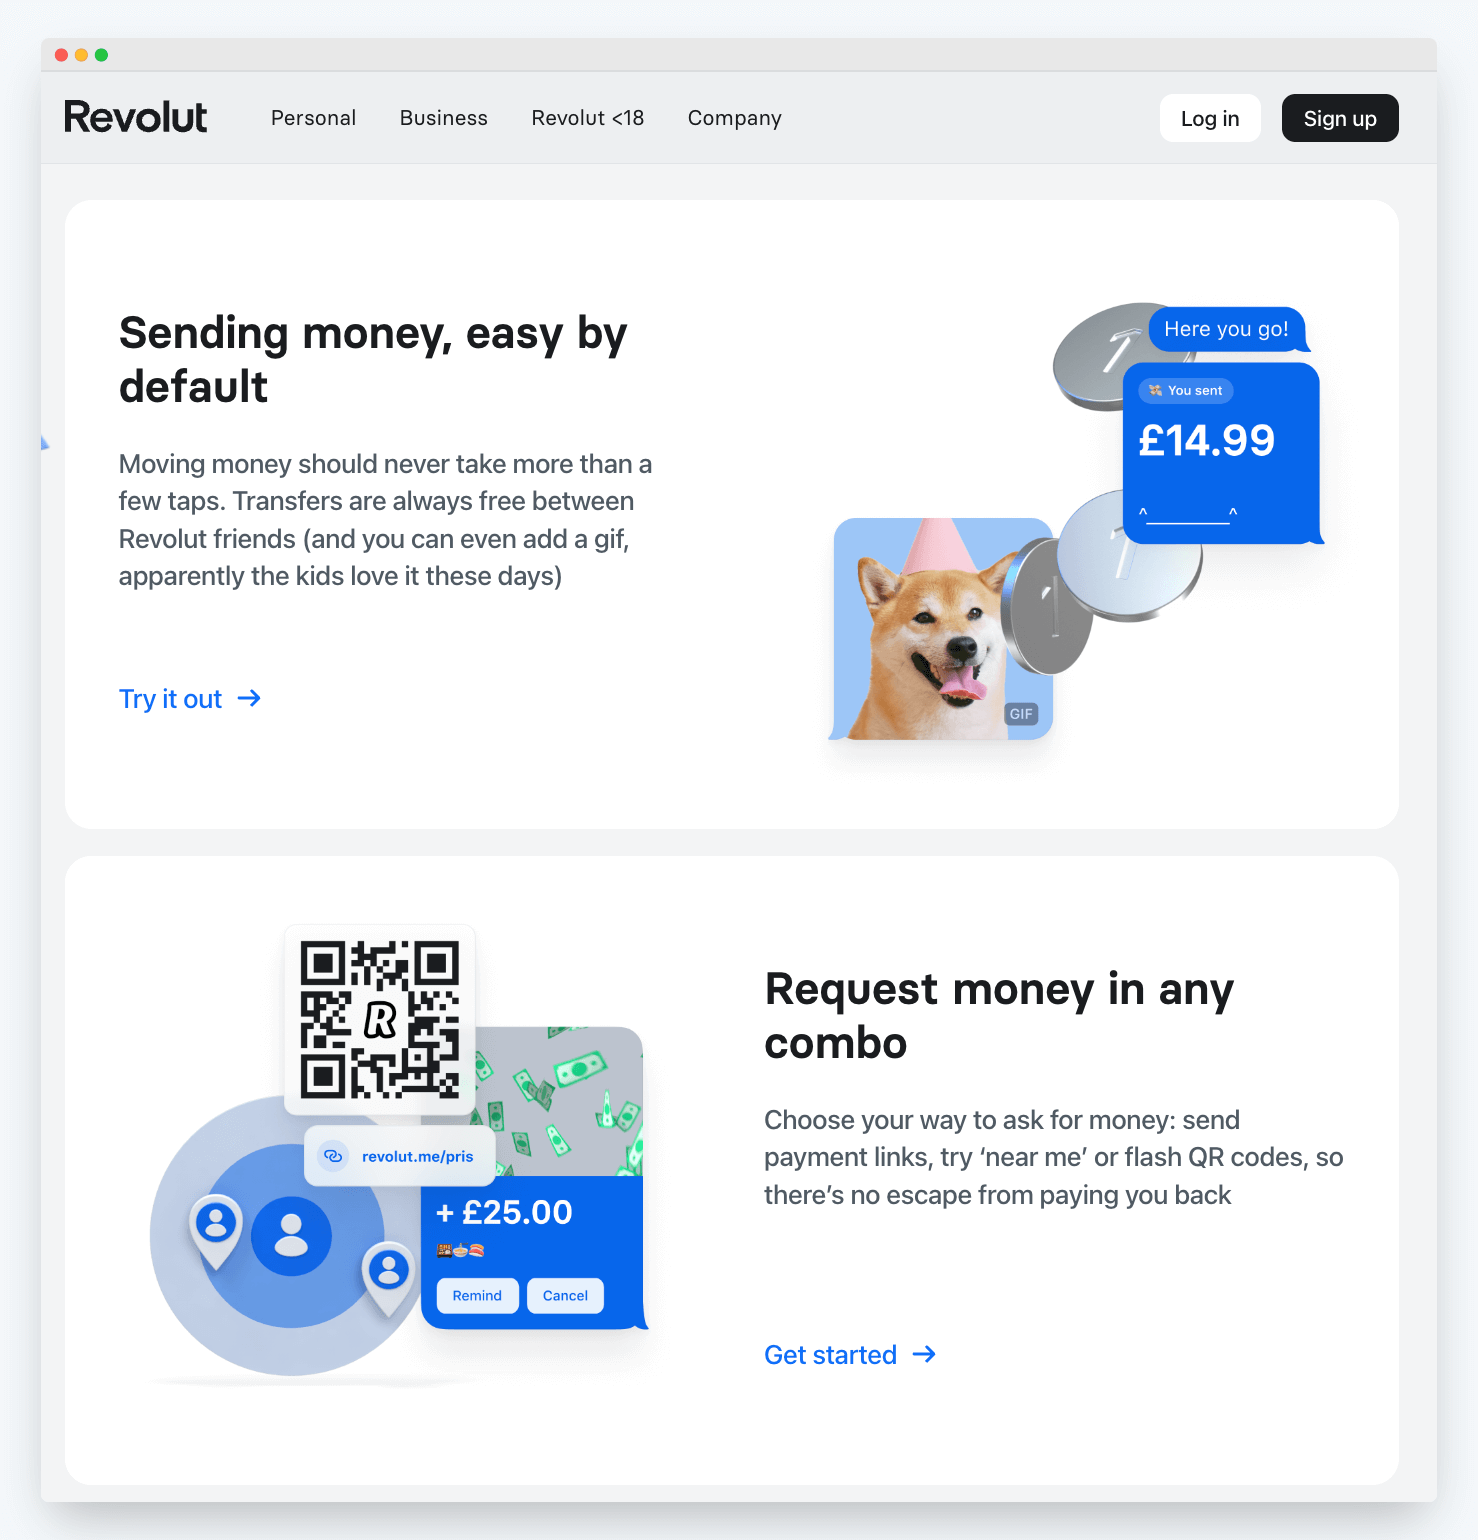 Revolut as an example of product messaging tailored to target audience.